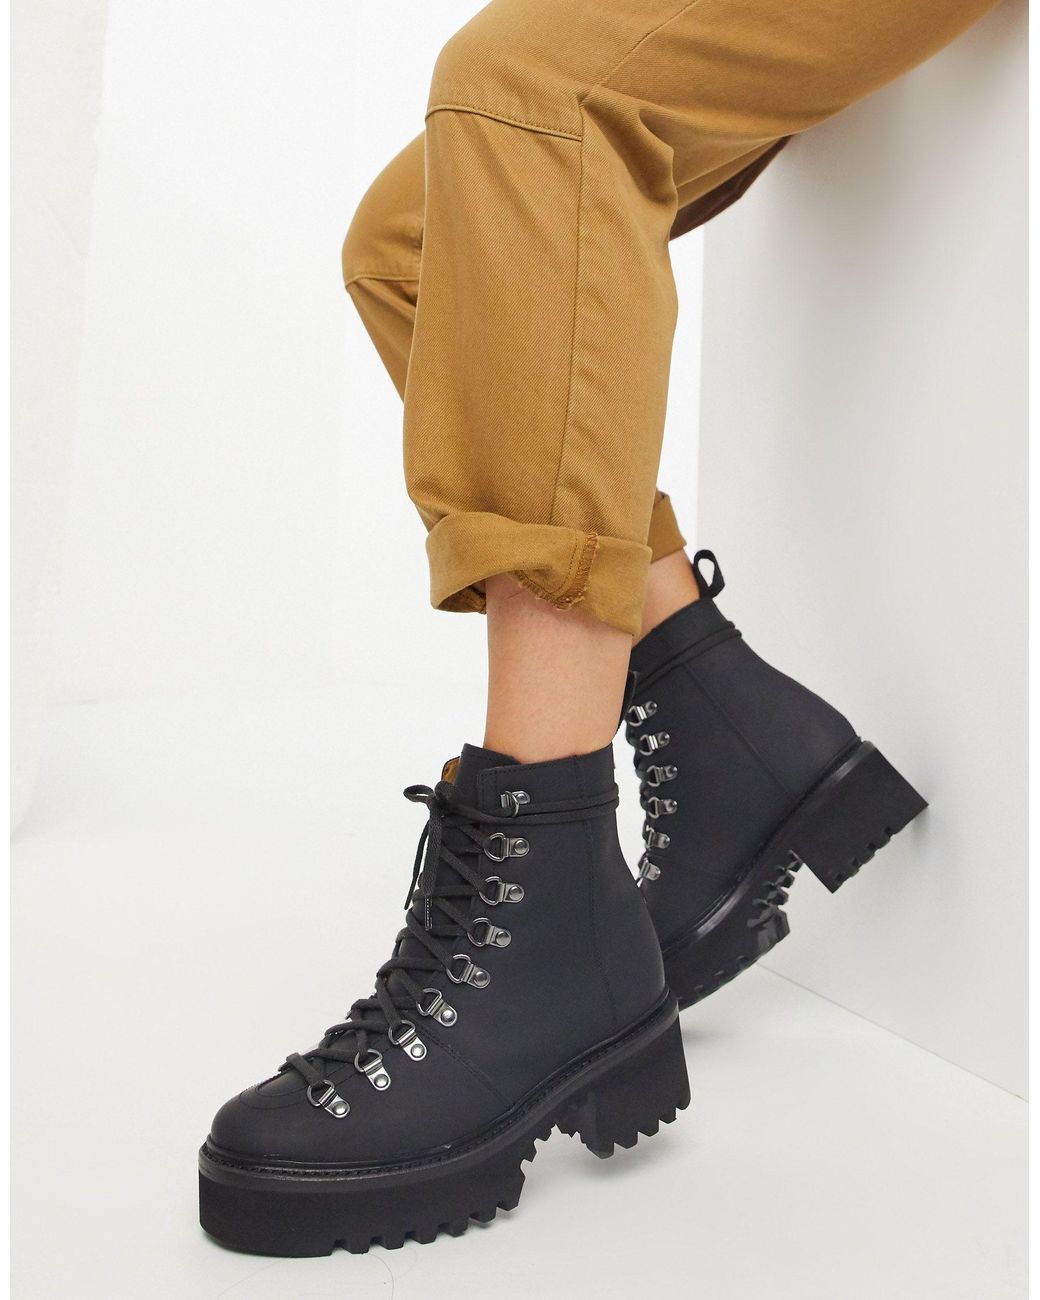 Grenson Nanette Rubberised Leather Chunky Hiker Boots in Black | Lyst UK